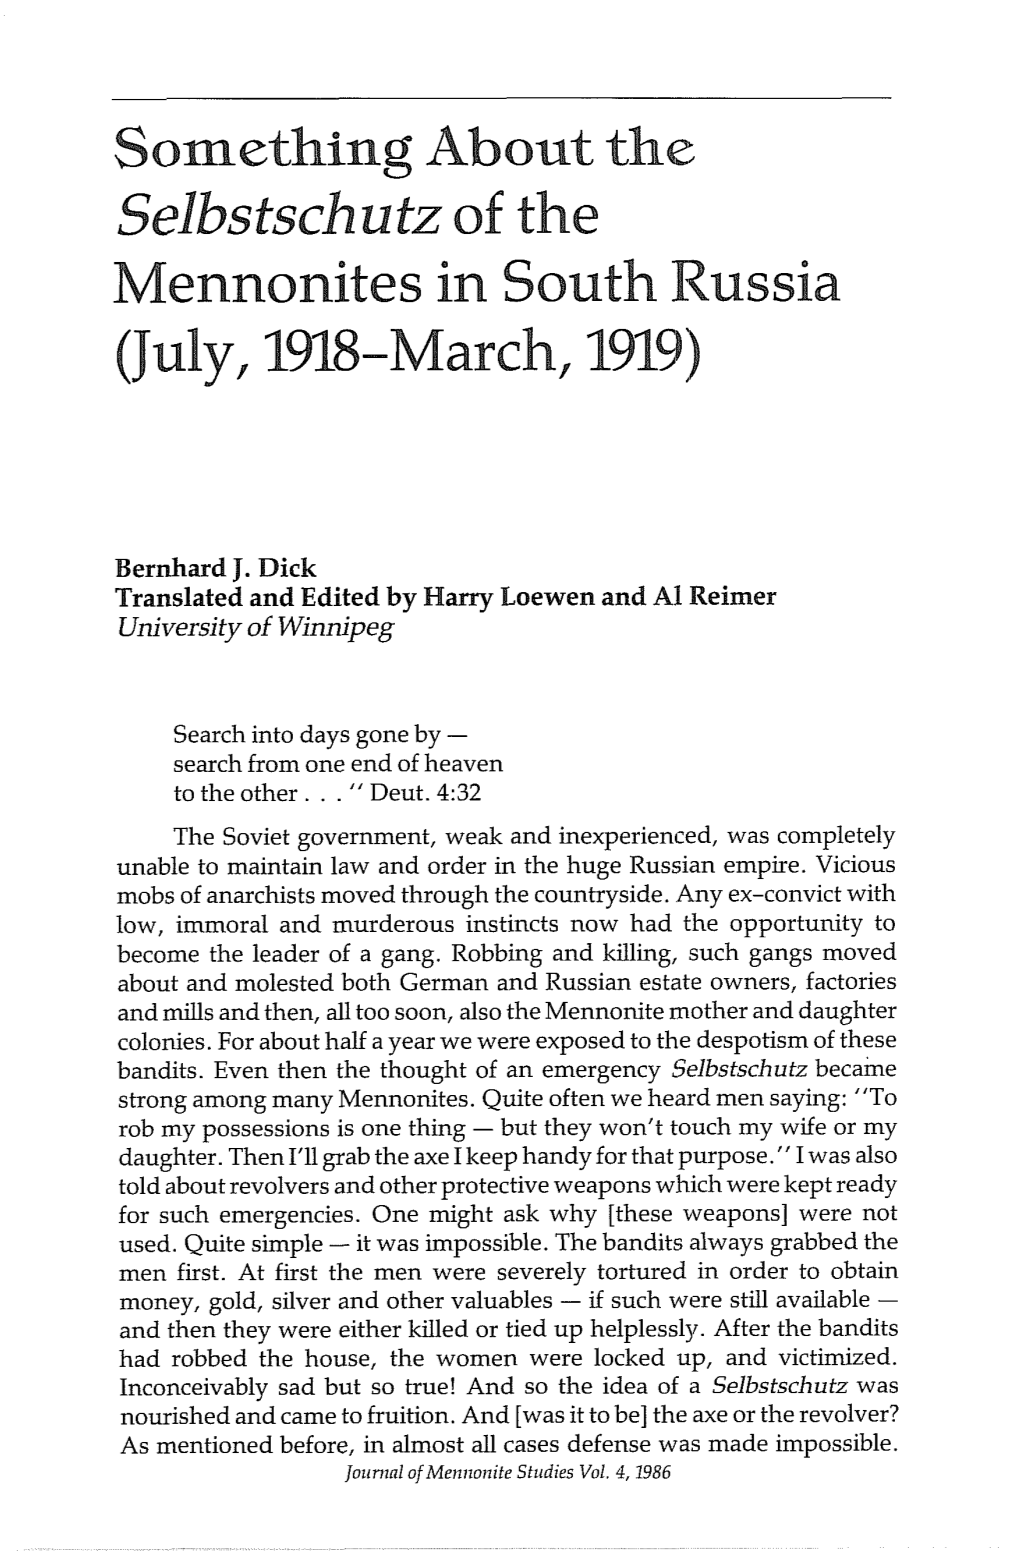 Something About the Selbstschutz of the Mennonites in South Russia Uly, 1918-March, 1919